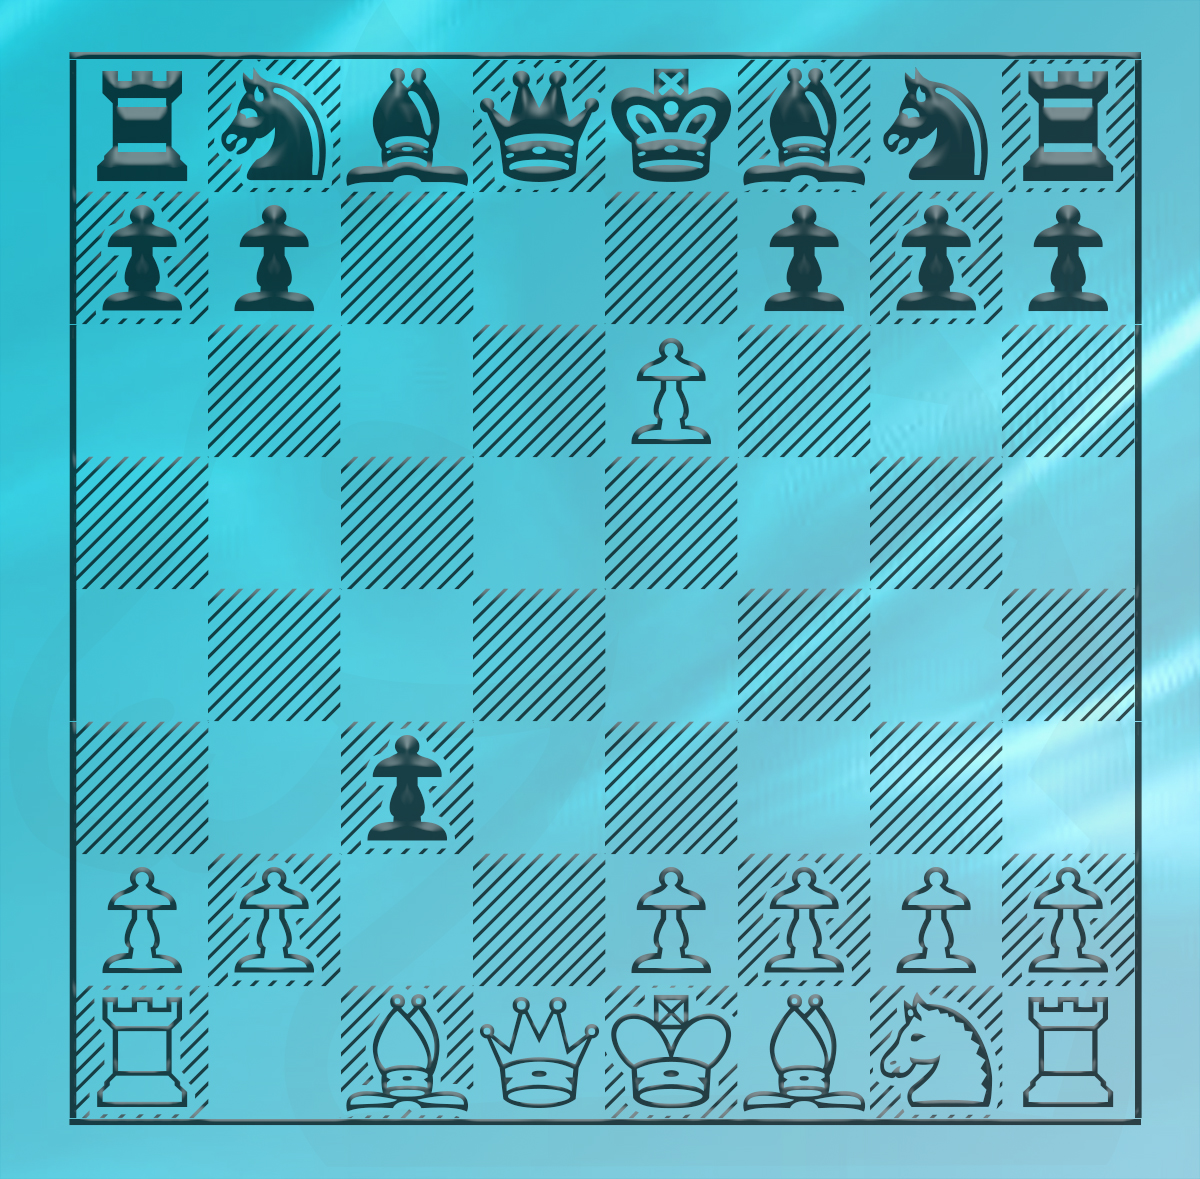 Alekhine's Defense: Tactical Puzzles from Miniatures by Bill